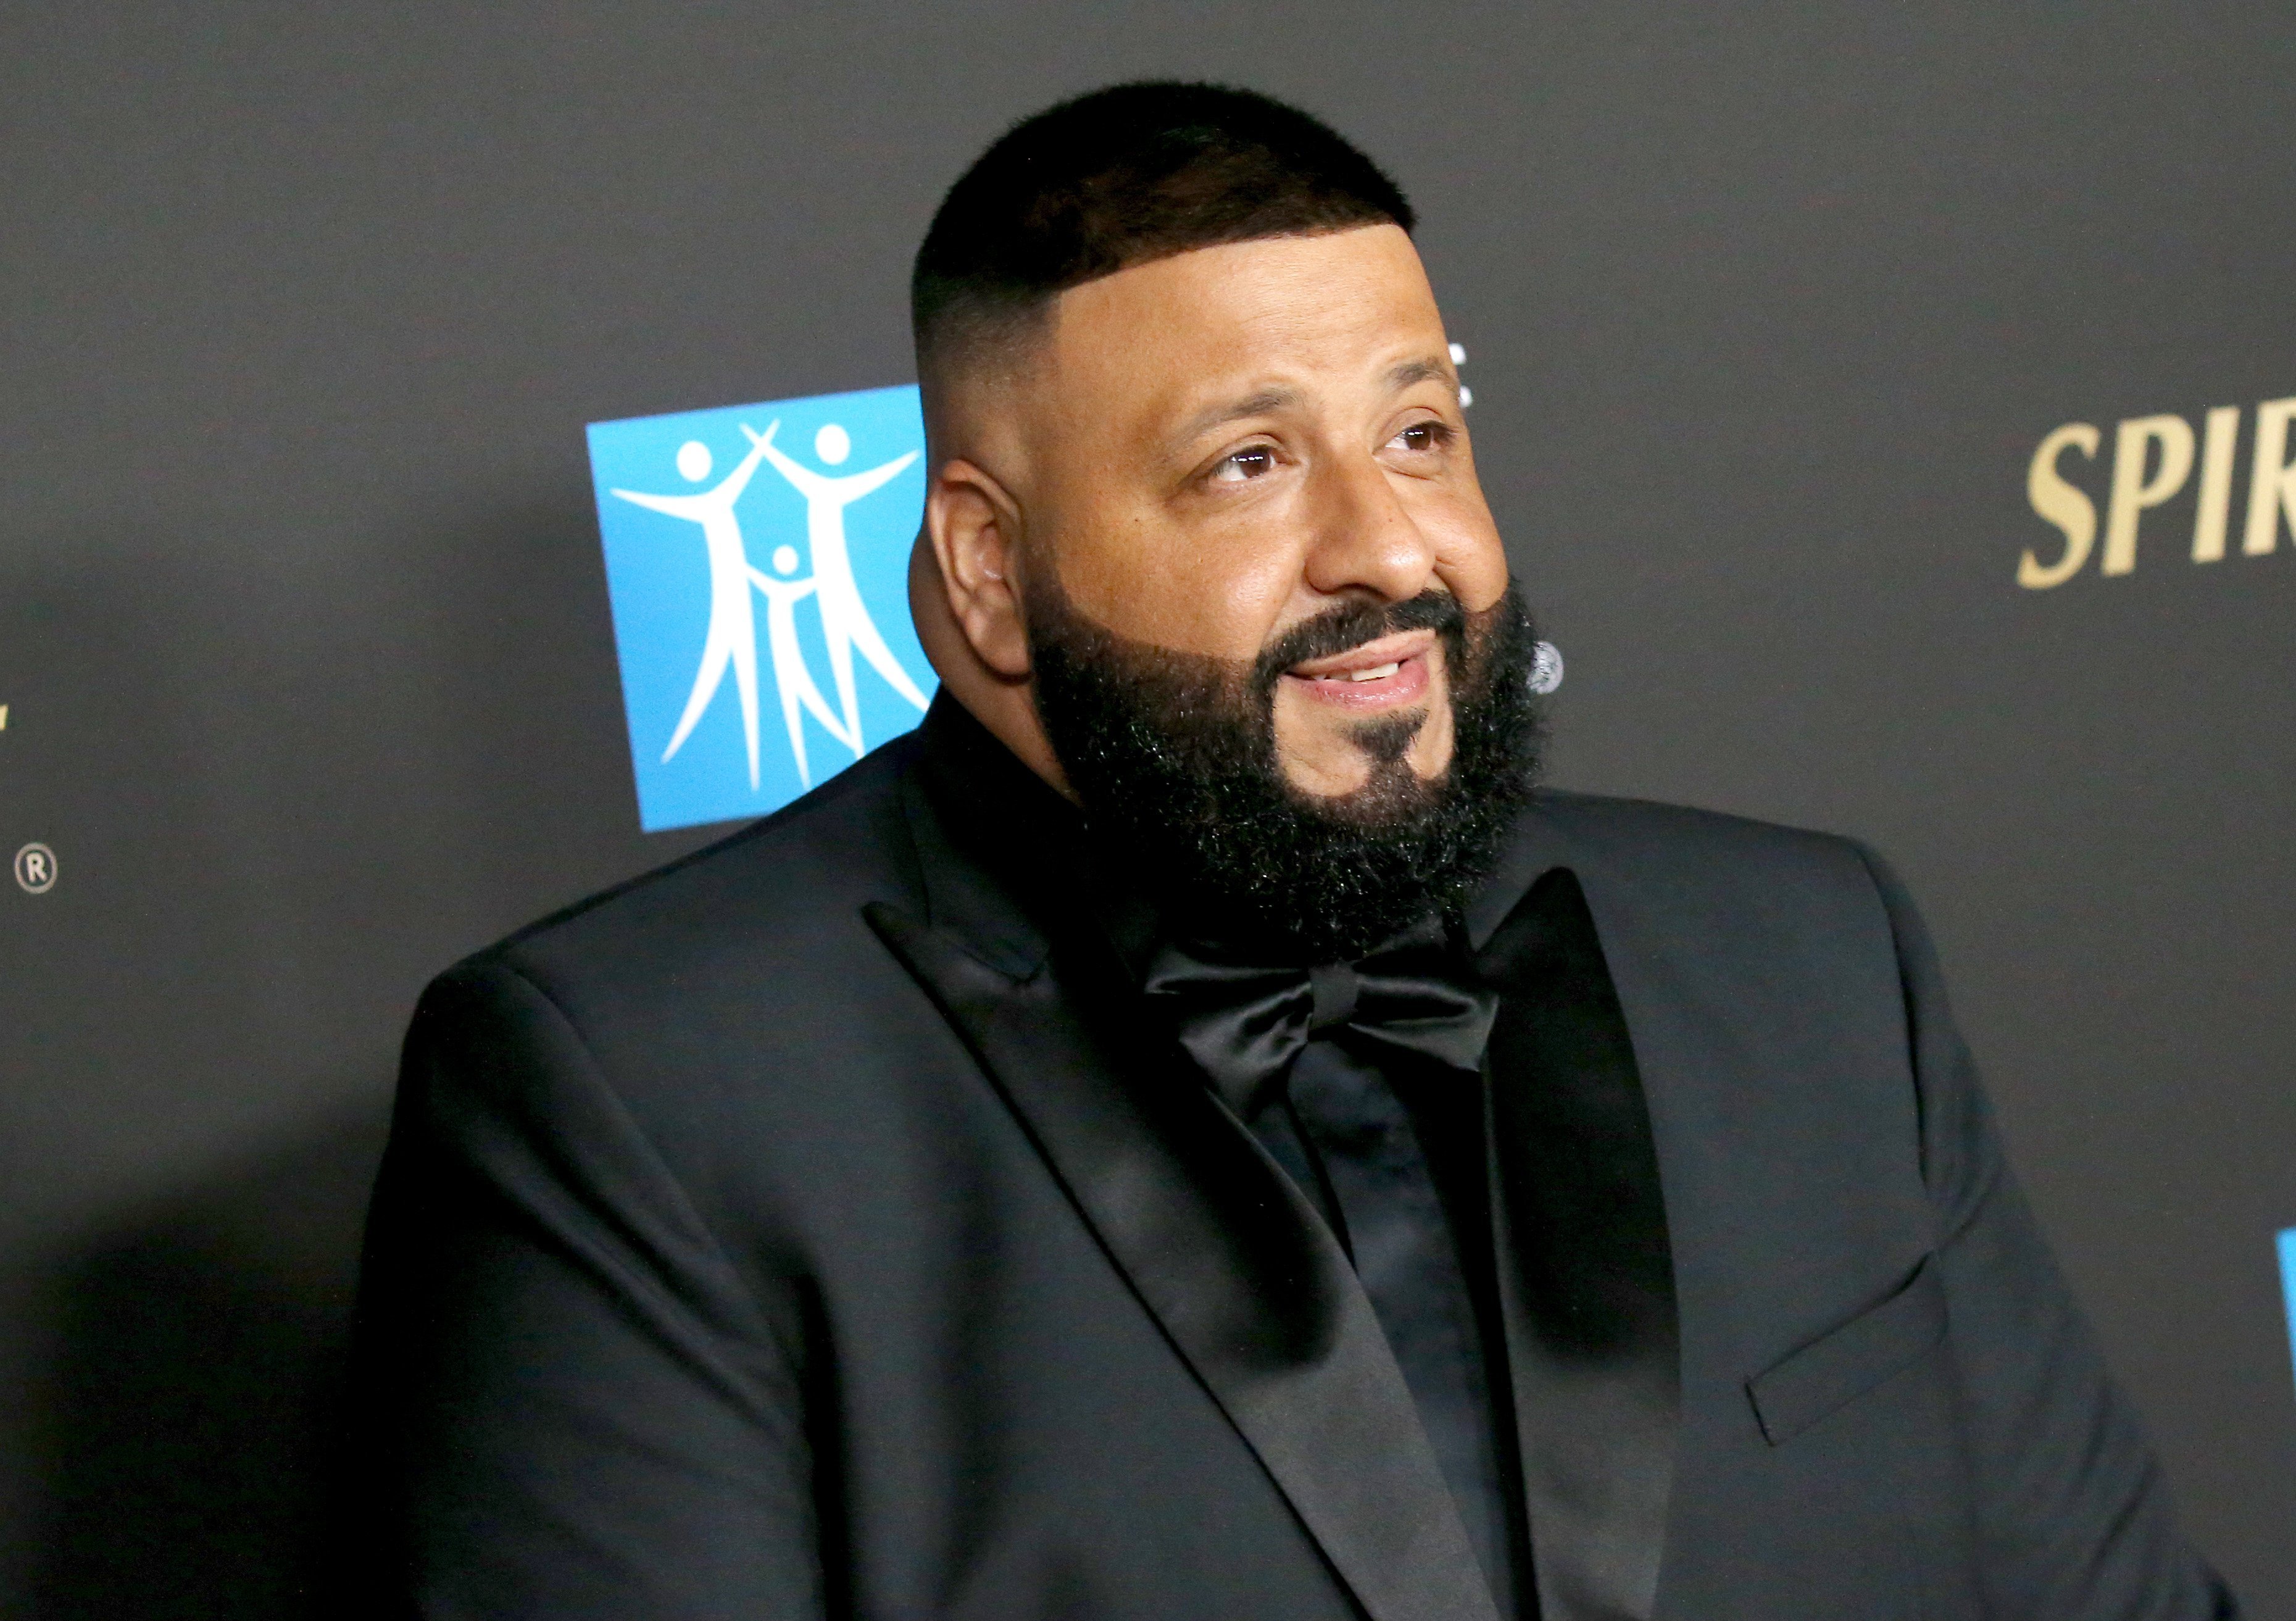 DJ Khaled attends the City Of Hope's Spirit of Life 2019 Gala held at The Barker Hanger on October 10, 2019 in Santa Monica, California. | Source: Getty Images.